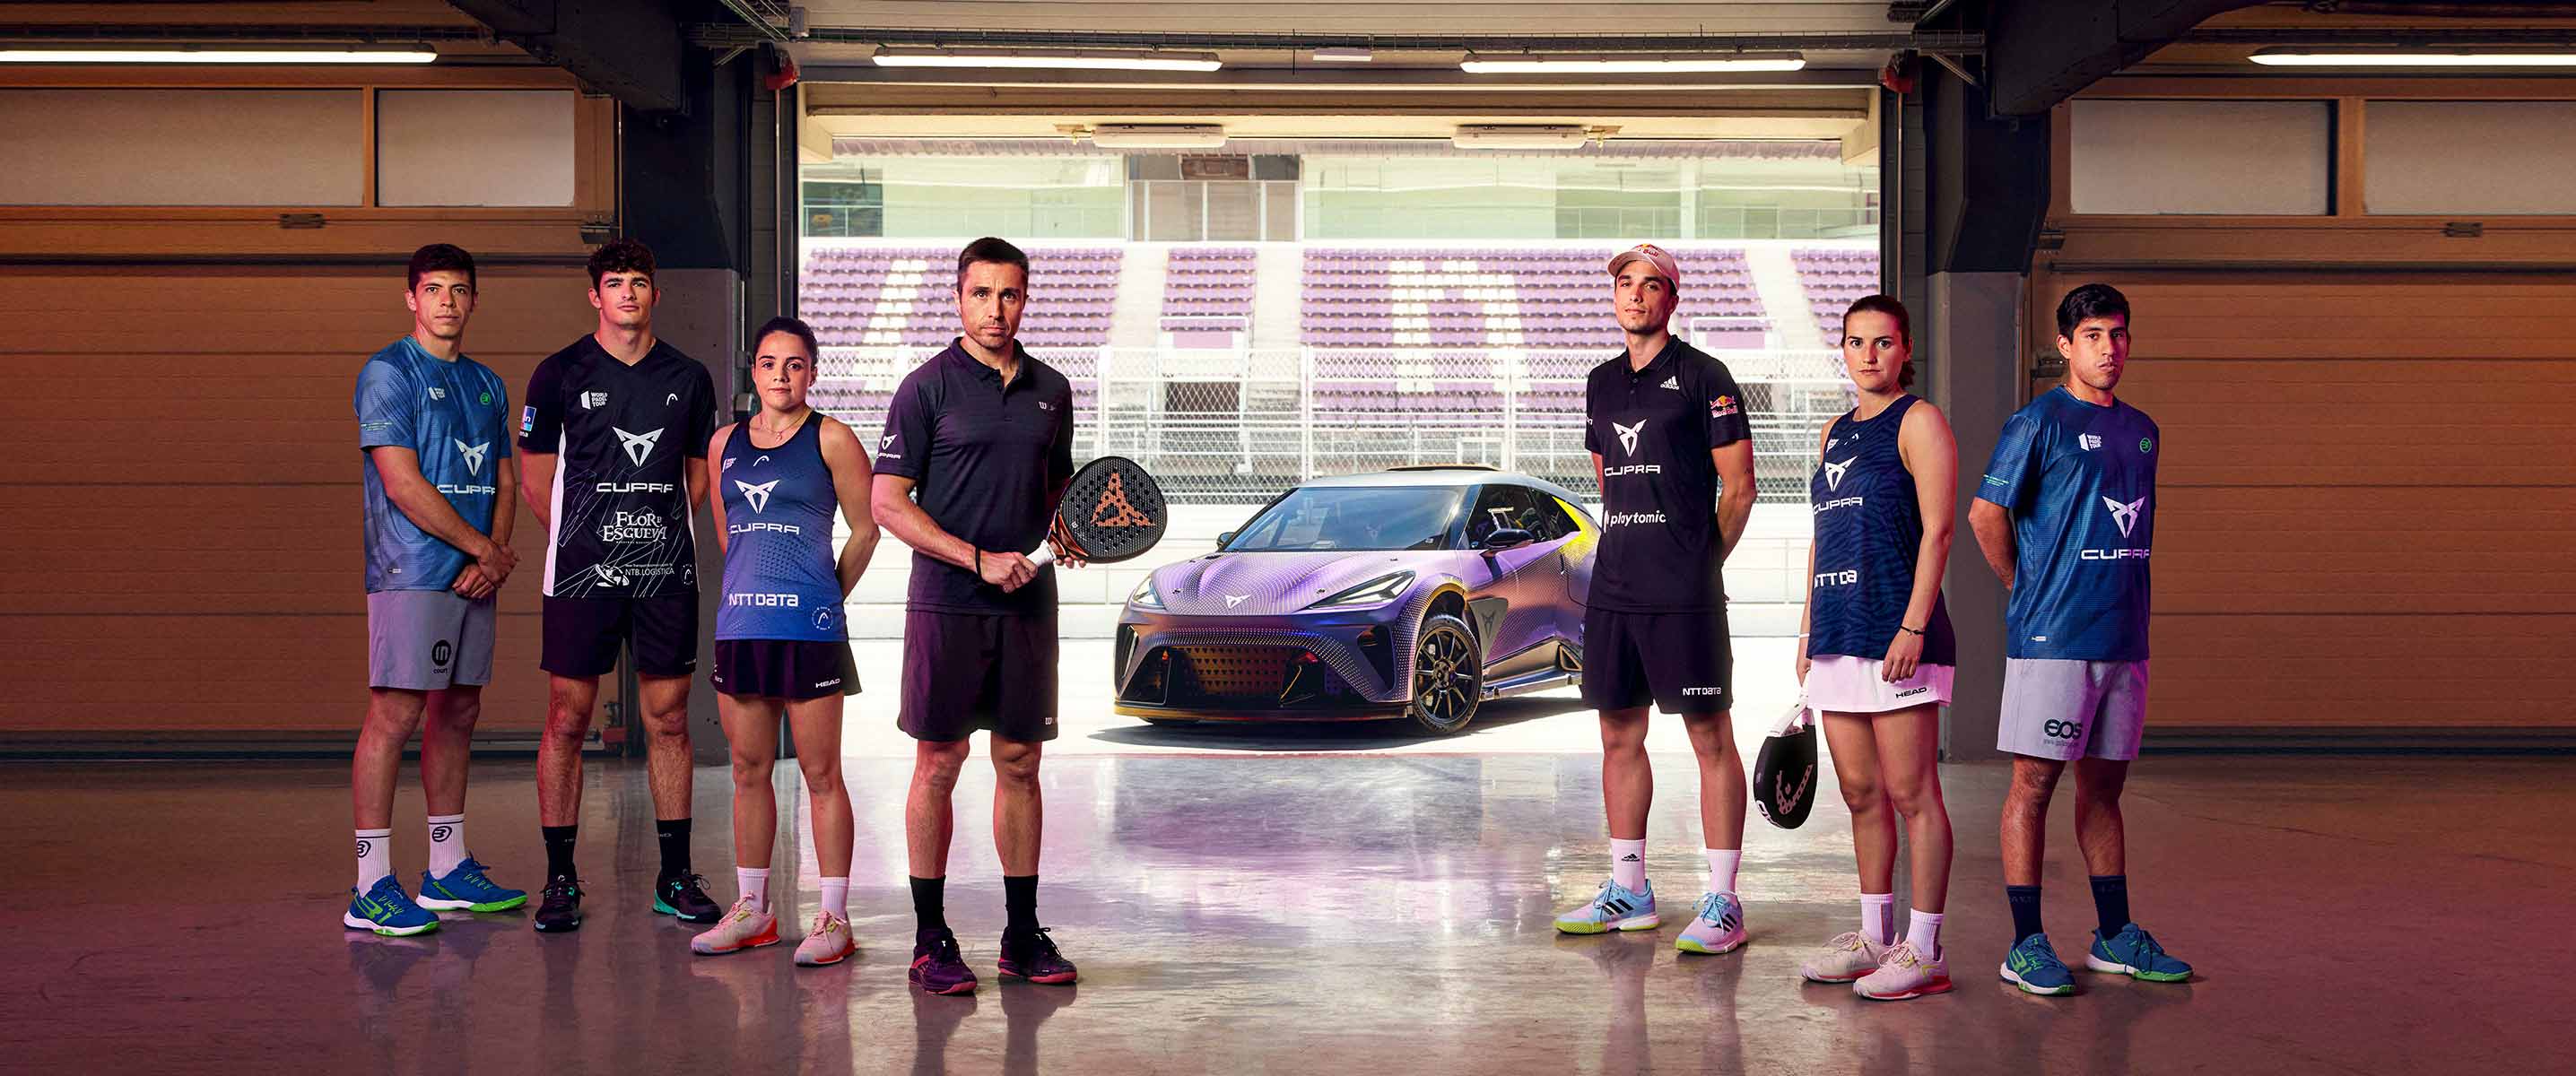 Four of the world’s top padel players – the new CUPRA ambassadors – standing with the CUPRA Ateca